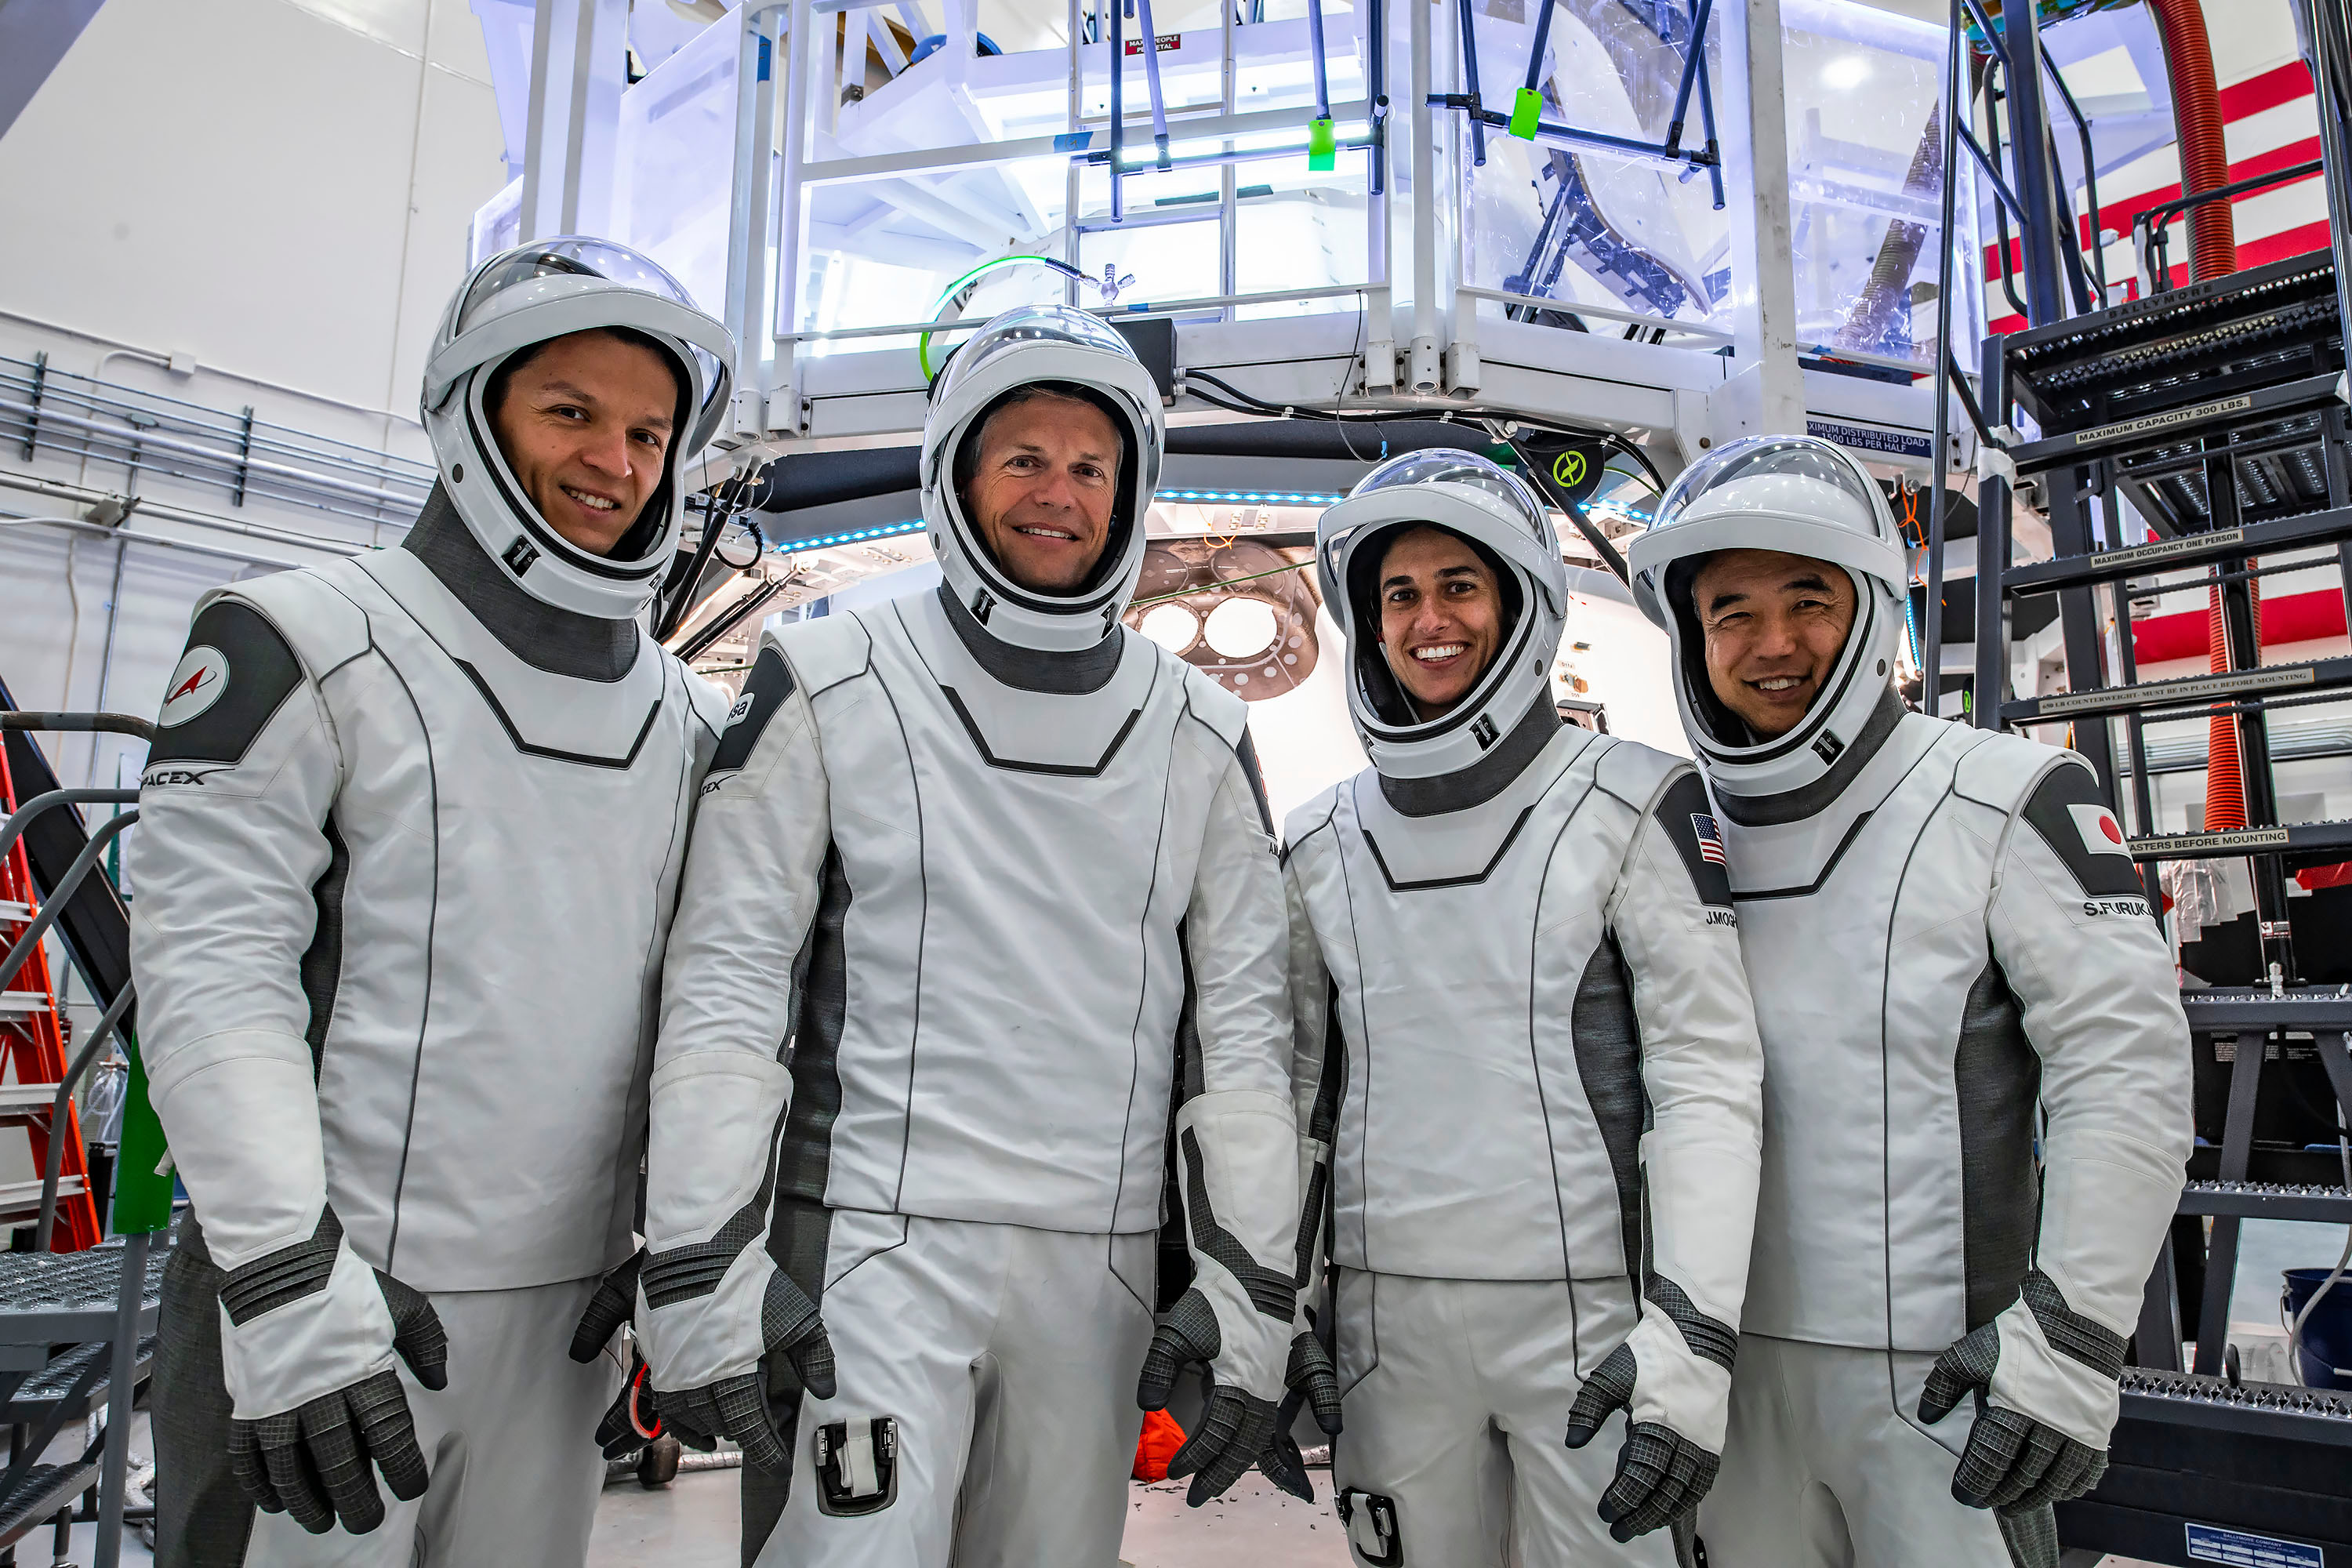 The crew of NASA's SpaceX Crew-7 mission poses for a photo in their SpaceX suits before their mission to the International Space Station.